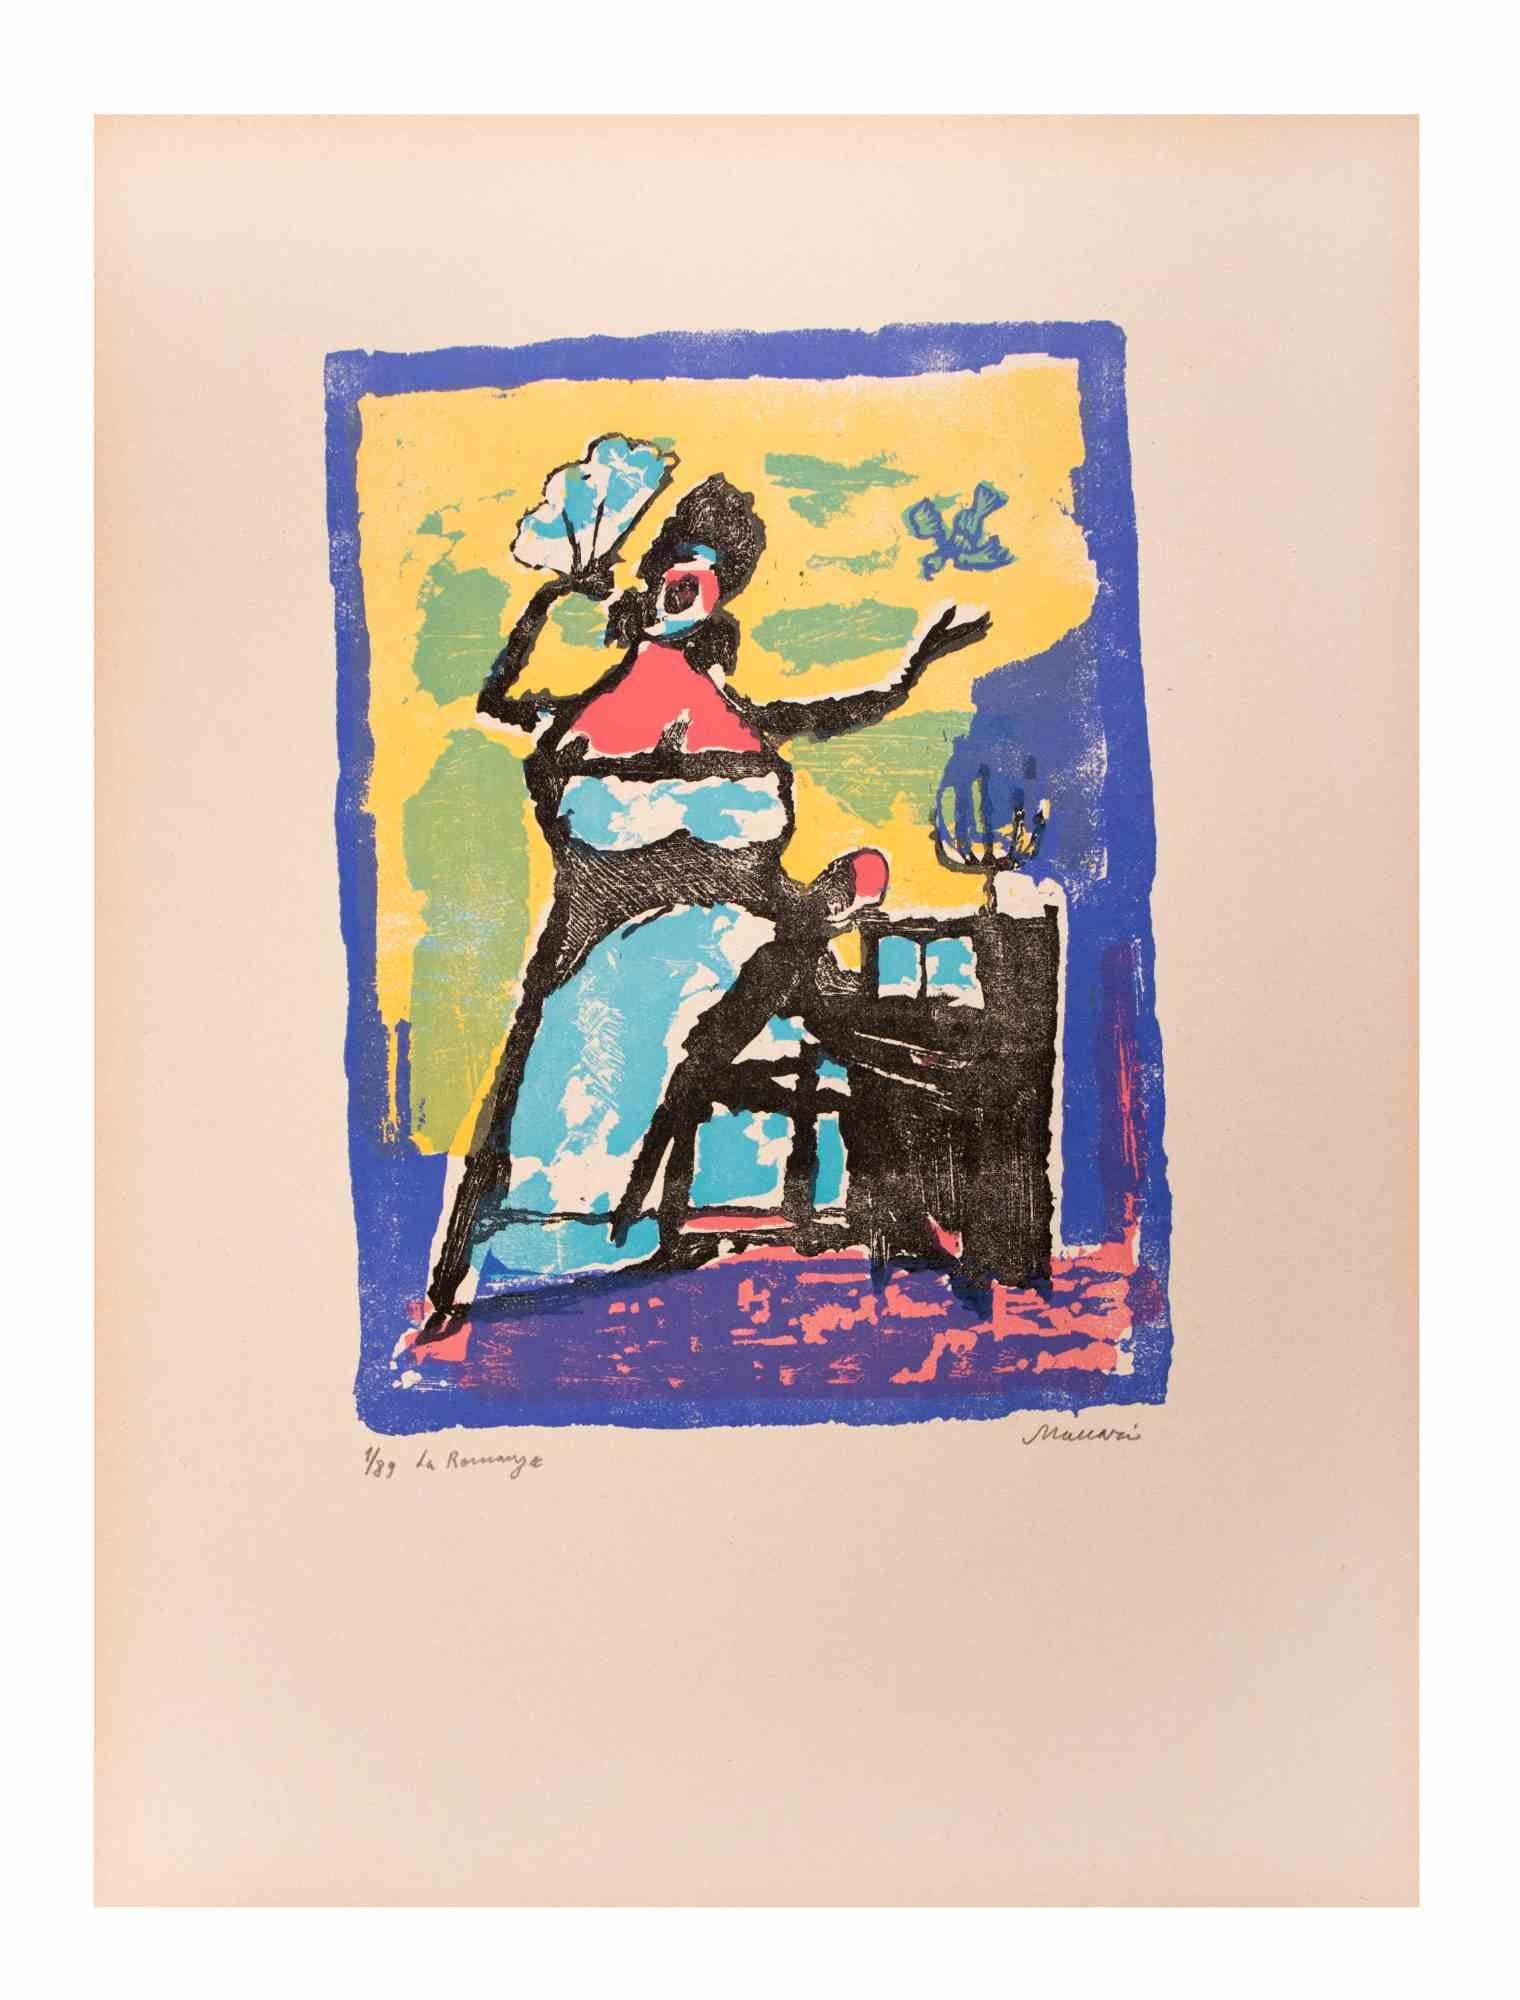 The Romance is an Artwork realized by Mino Maccari  (1924-1989) in the Mid-20th Century.

Colored woodcut on paper. Hand-signed on the lower, numbered 1/89 specimens and titled on the left margin.

Good conditions.

Mino Maccari (Siena, 1924-Rome,